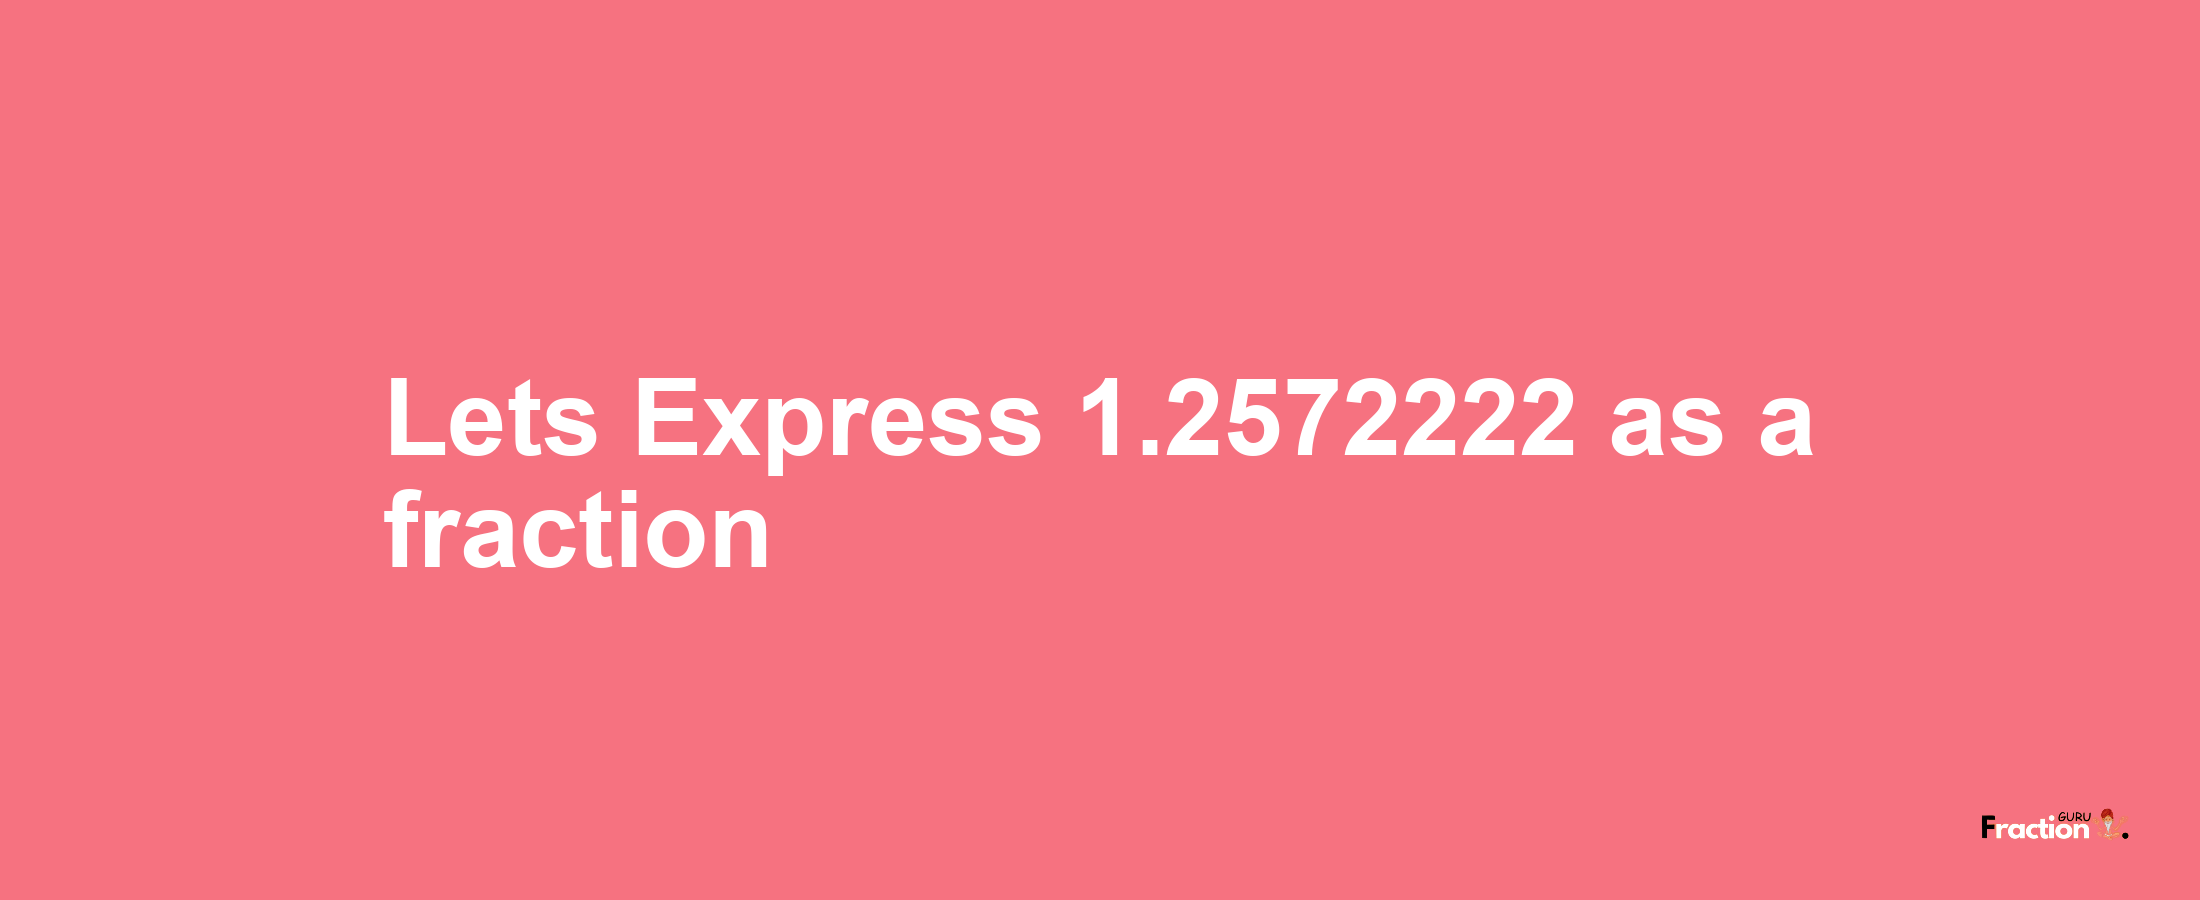 Lets Express 1.2572222 as afraction